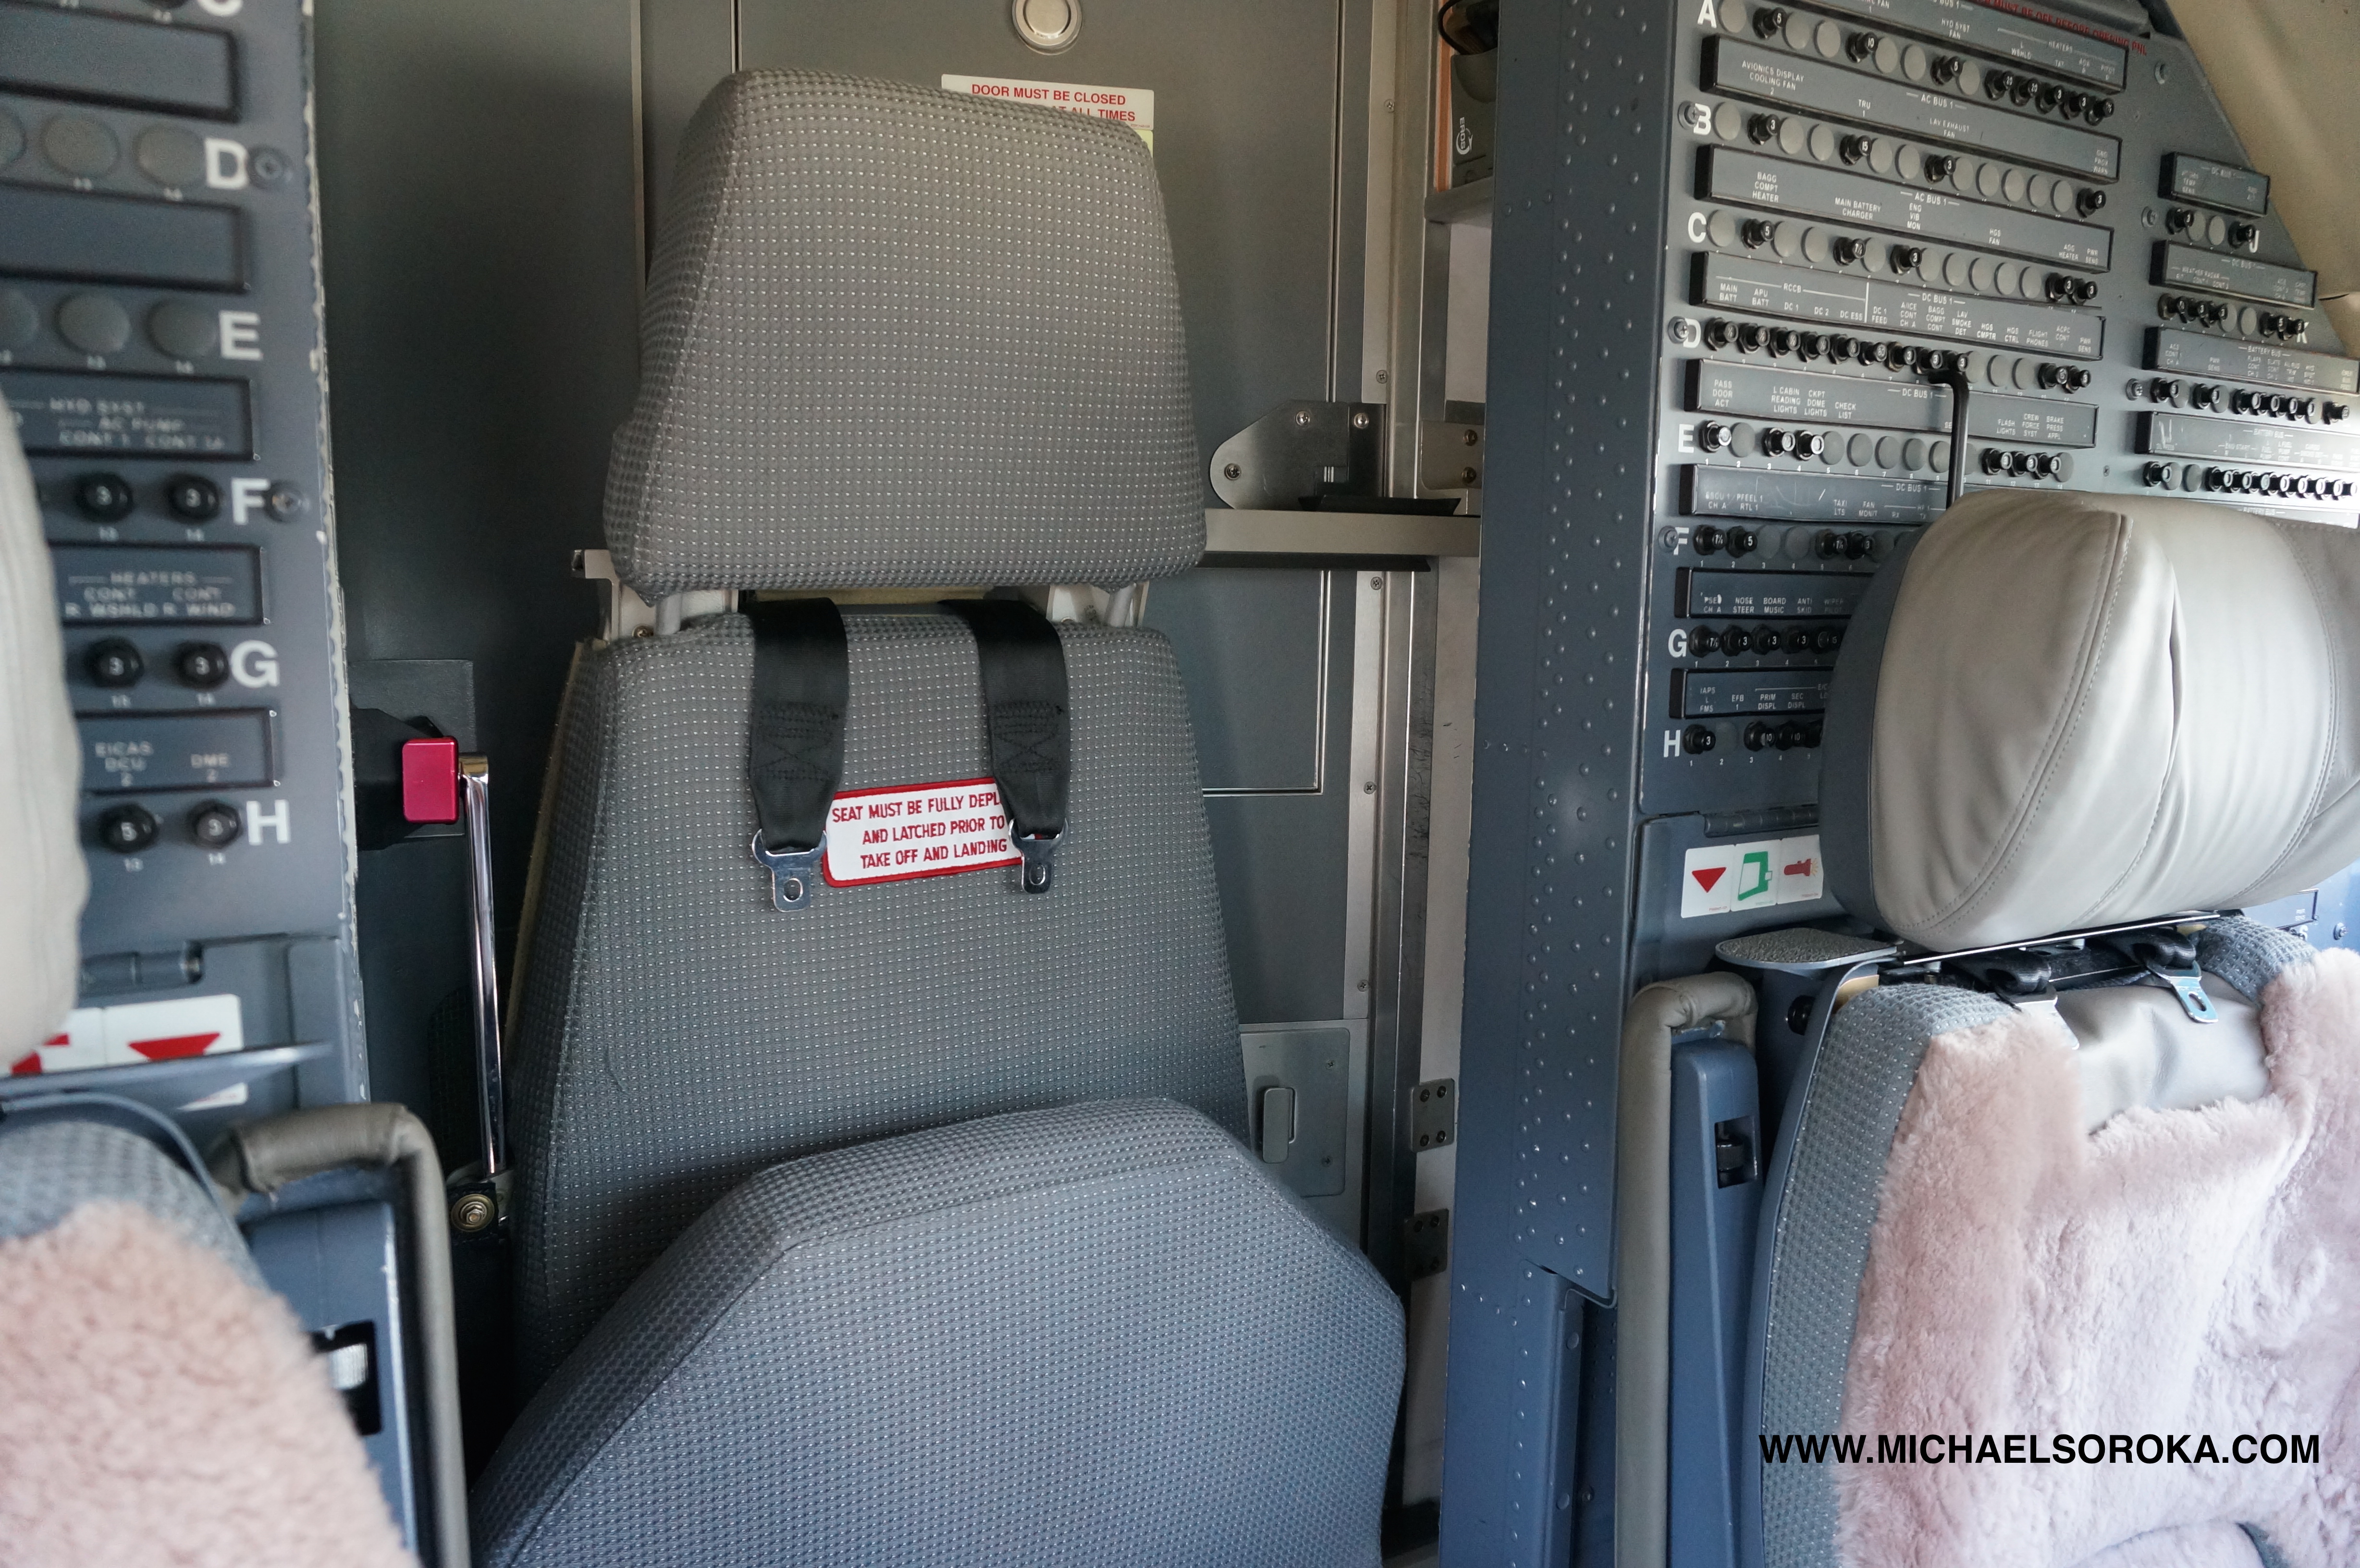 Jump Seat Etiquette in the Boeing 737 